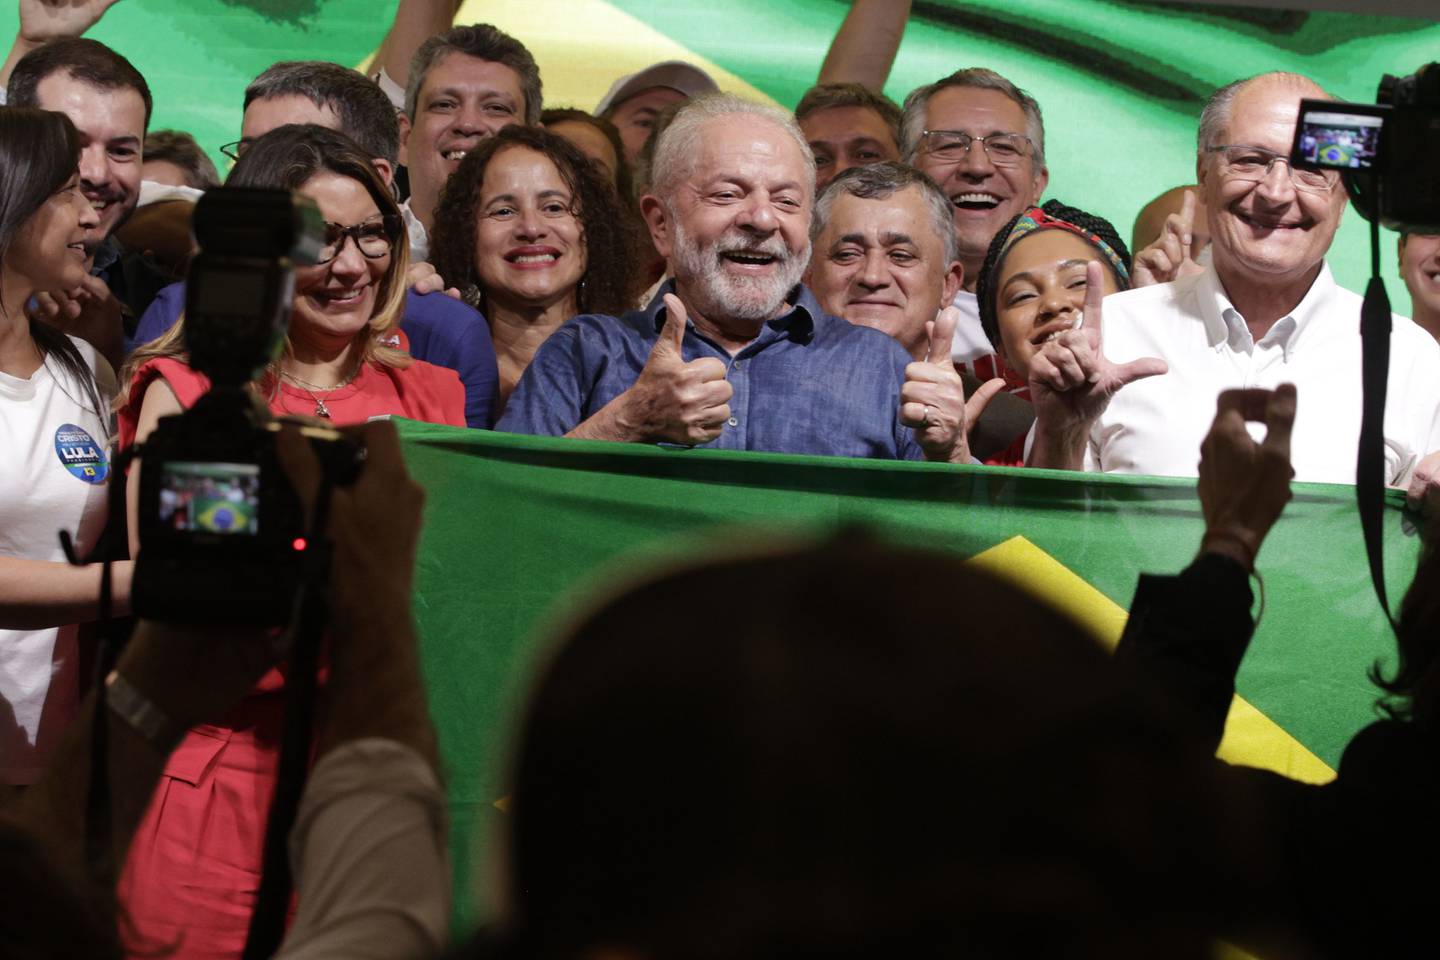 Luiz Inacio Lula da Silva, Brazil's president-elect, center, poses for a photograph after winning the runoff presidential election in Sao Paulo, Brazil, on Sunday, Oct. 30, 2022. Photographer: Tuane Fernandes/Bloomberg